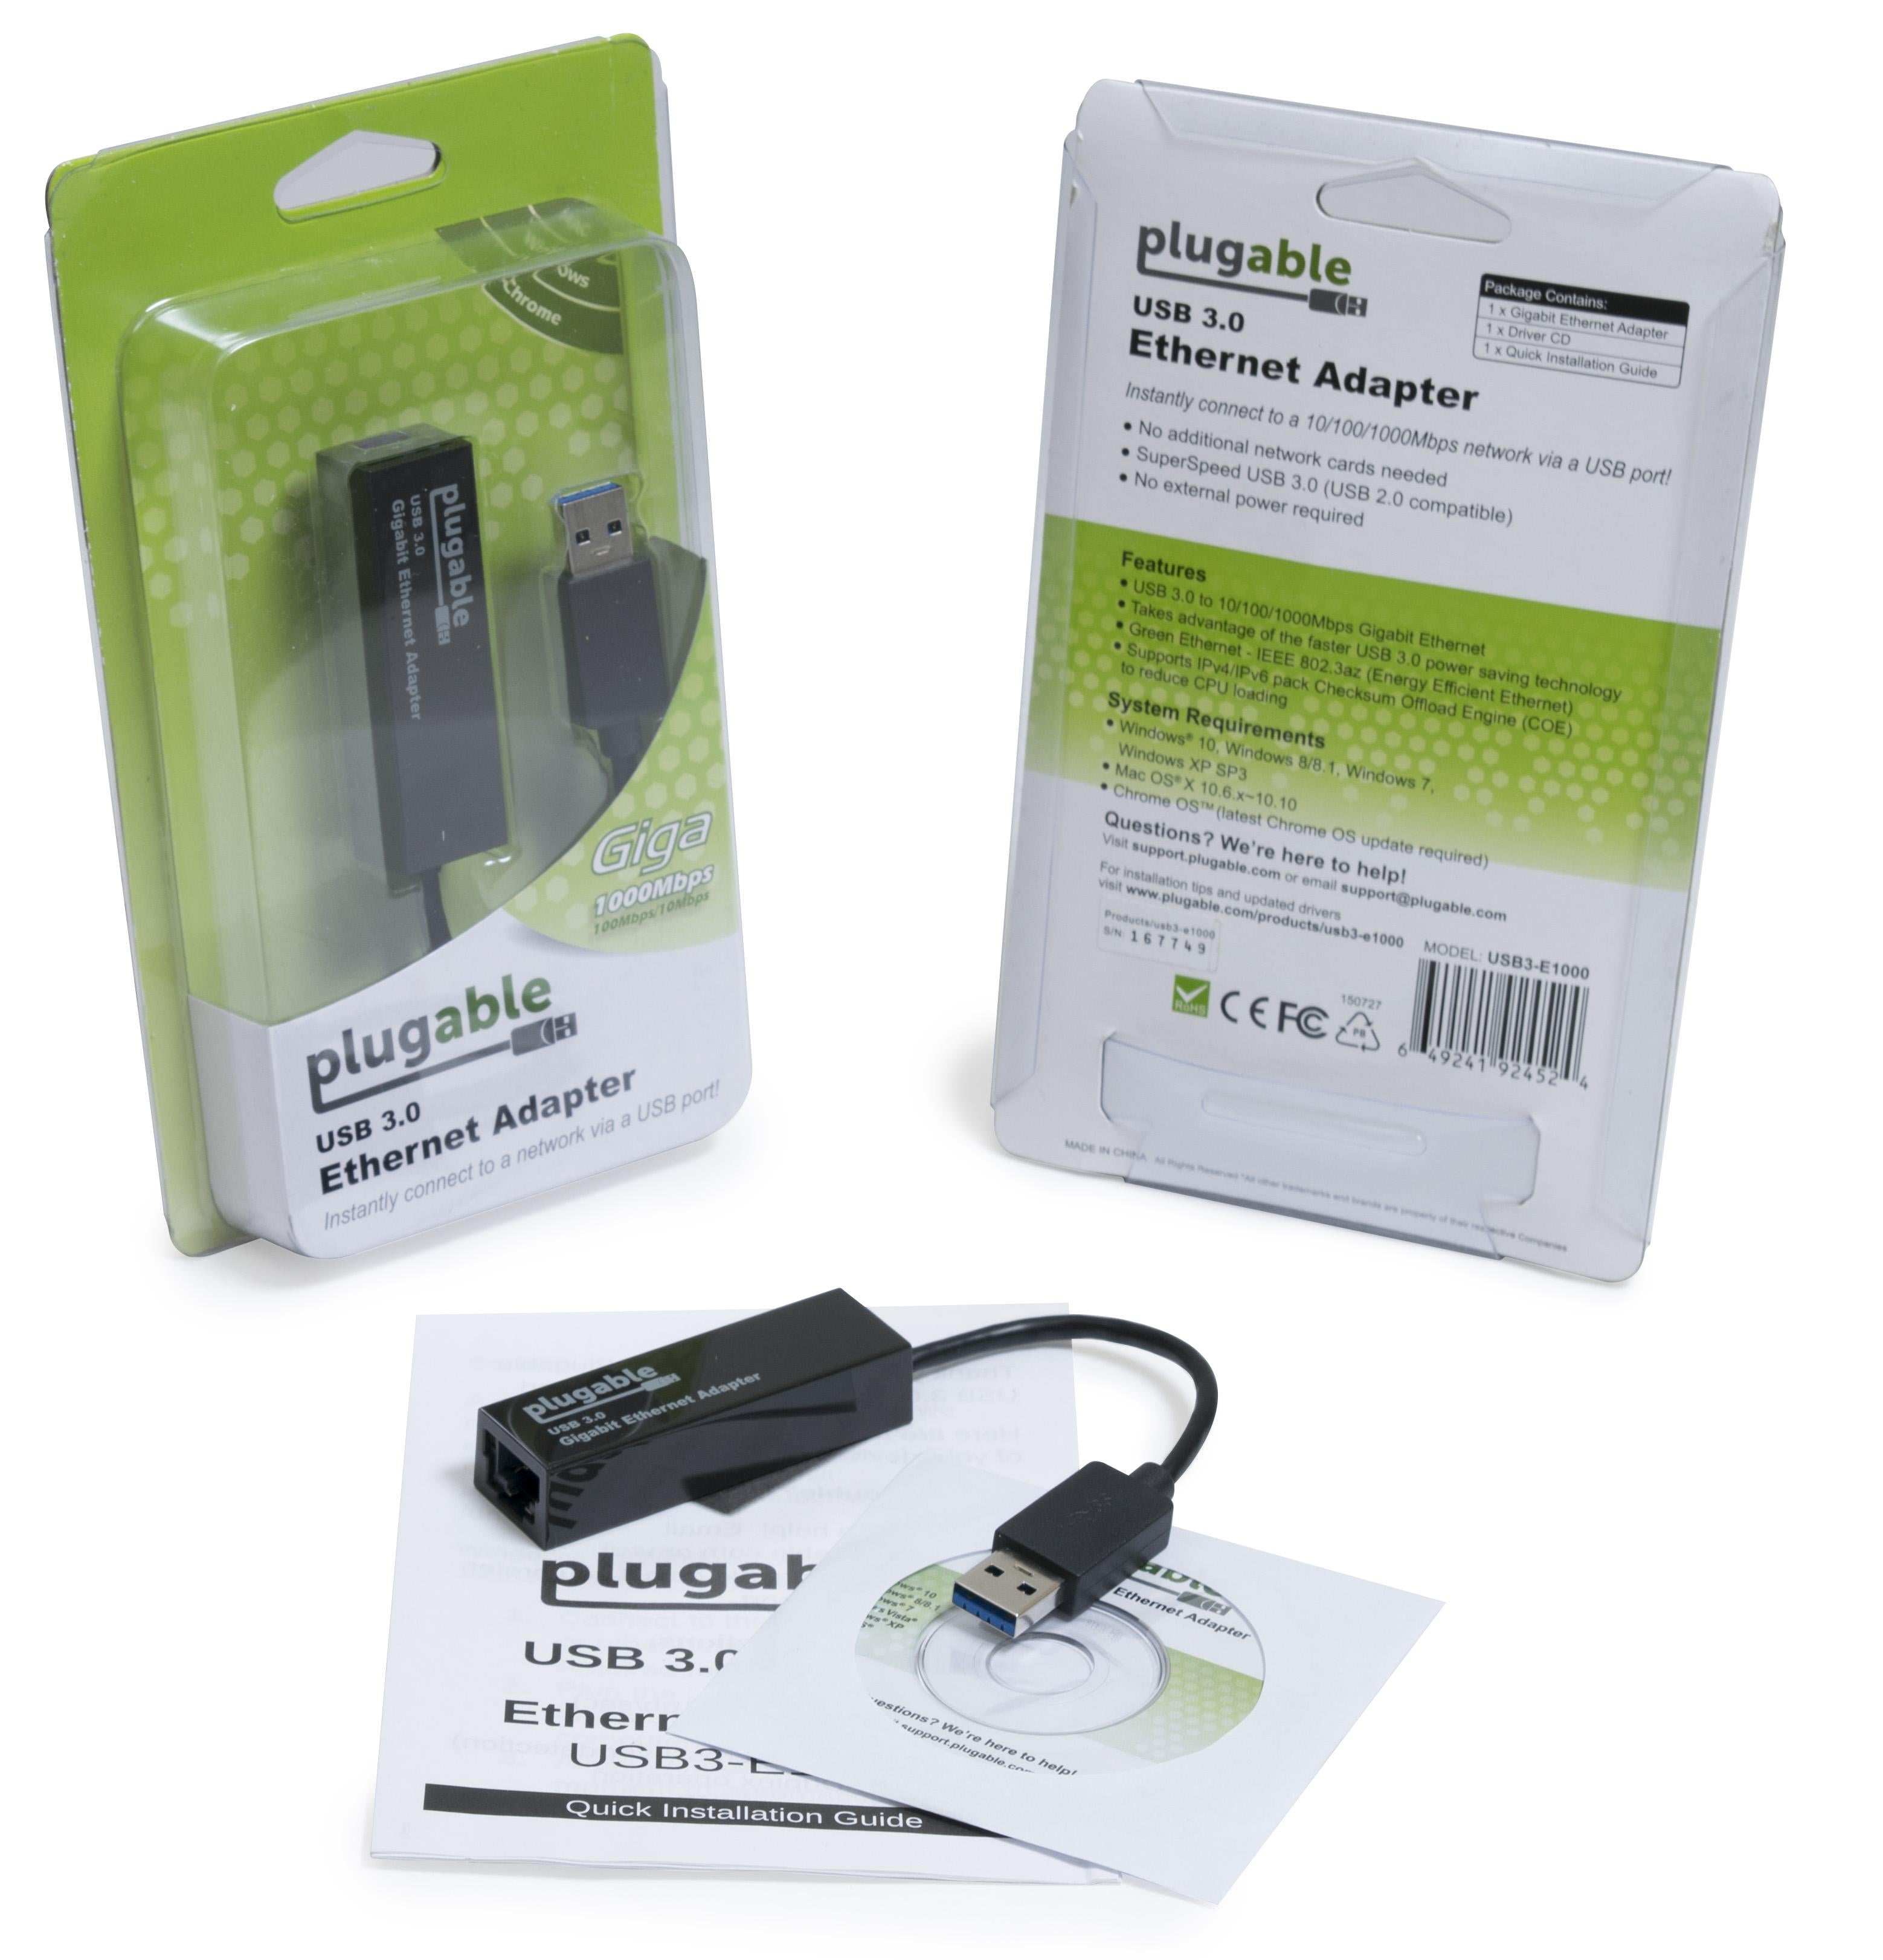 Image of Plugable USB3-E1000 Gigabit Adapter. Includes images of the front and back of box, as well as an image of the adapter itself.